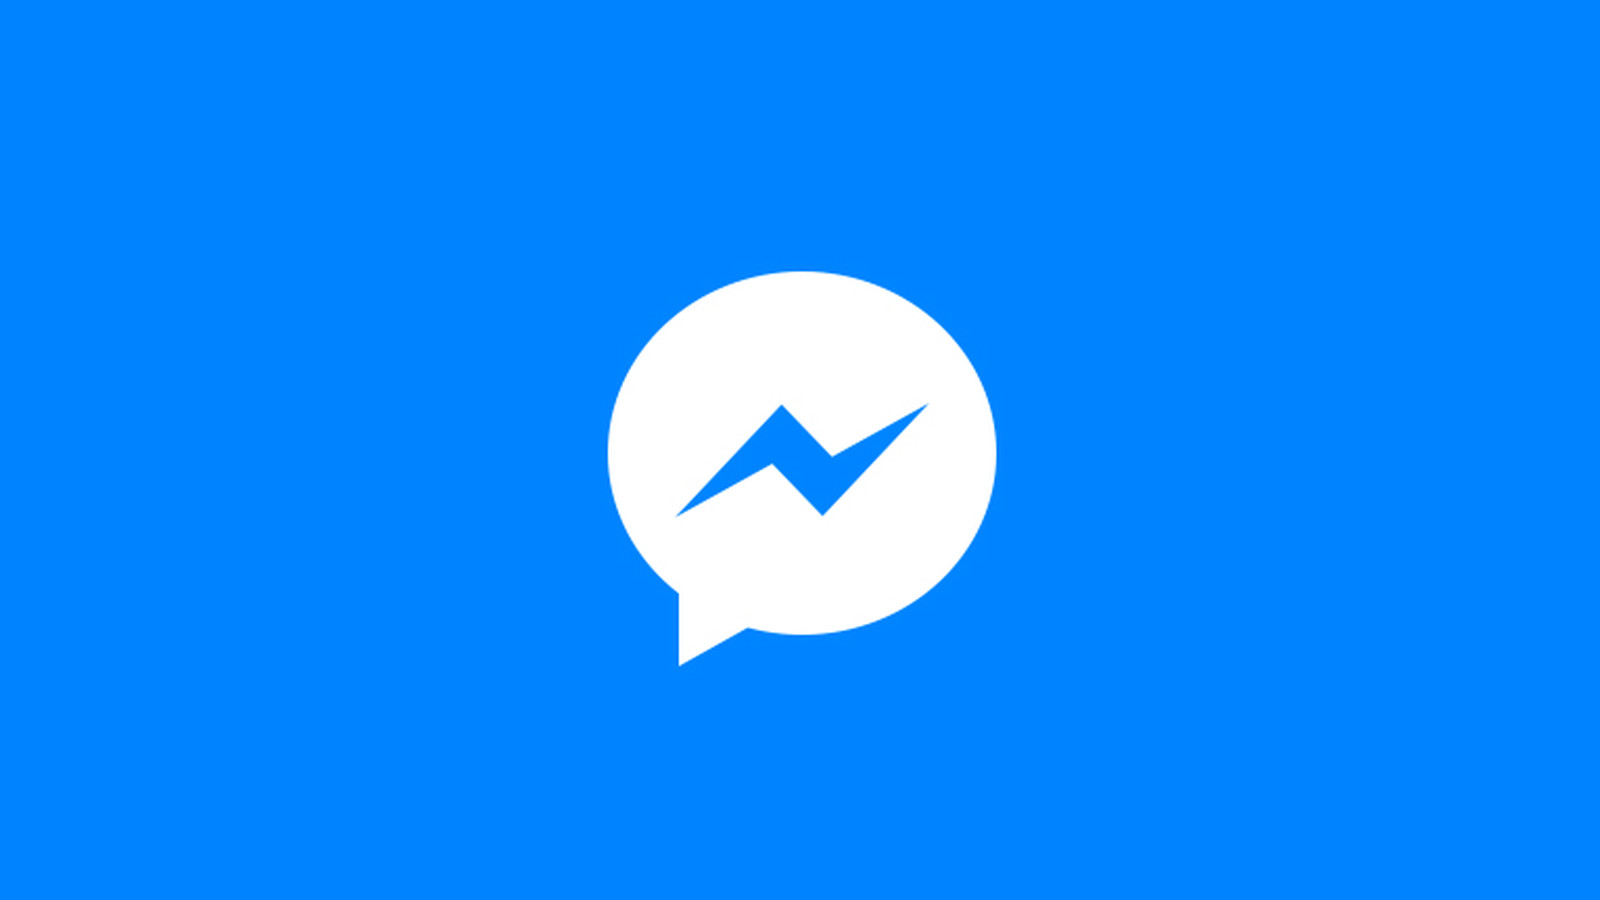 Facebook Messenger Hits 700 Million Total Users - Recode